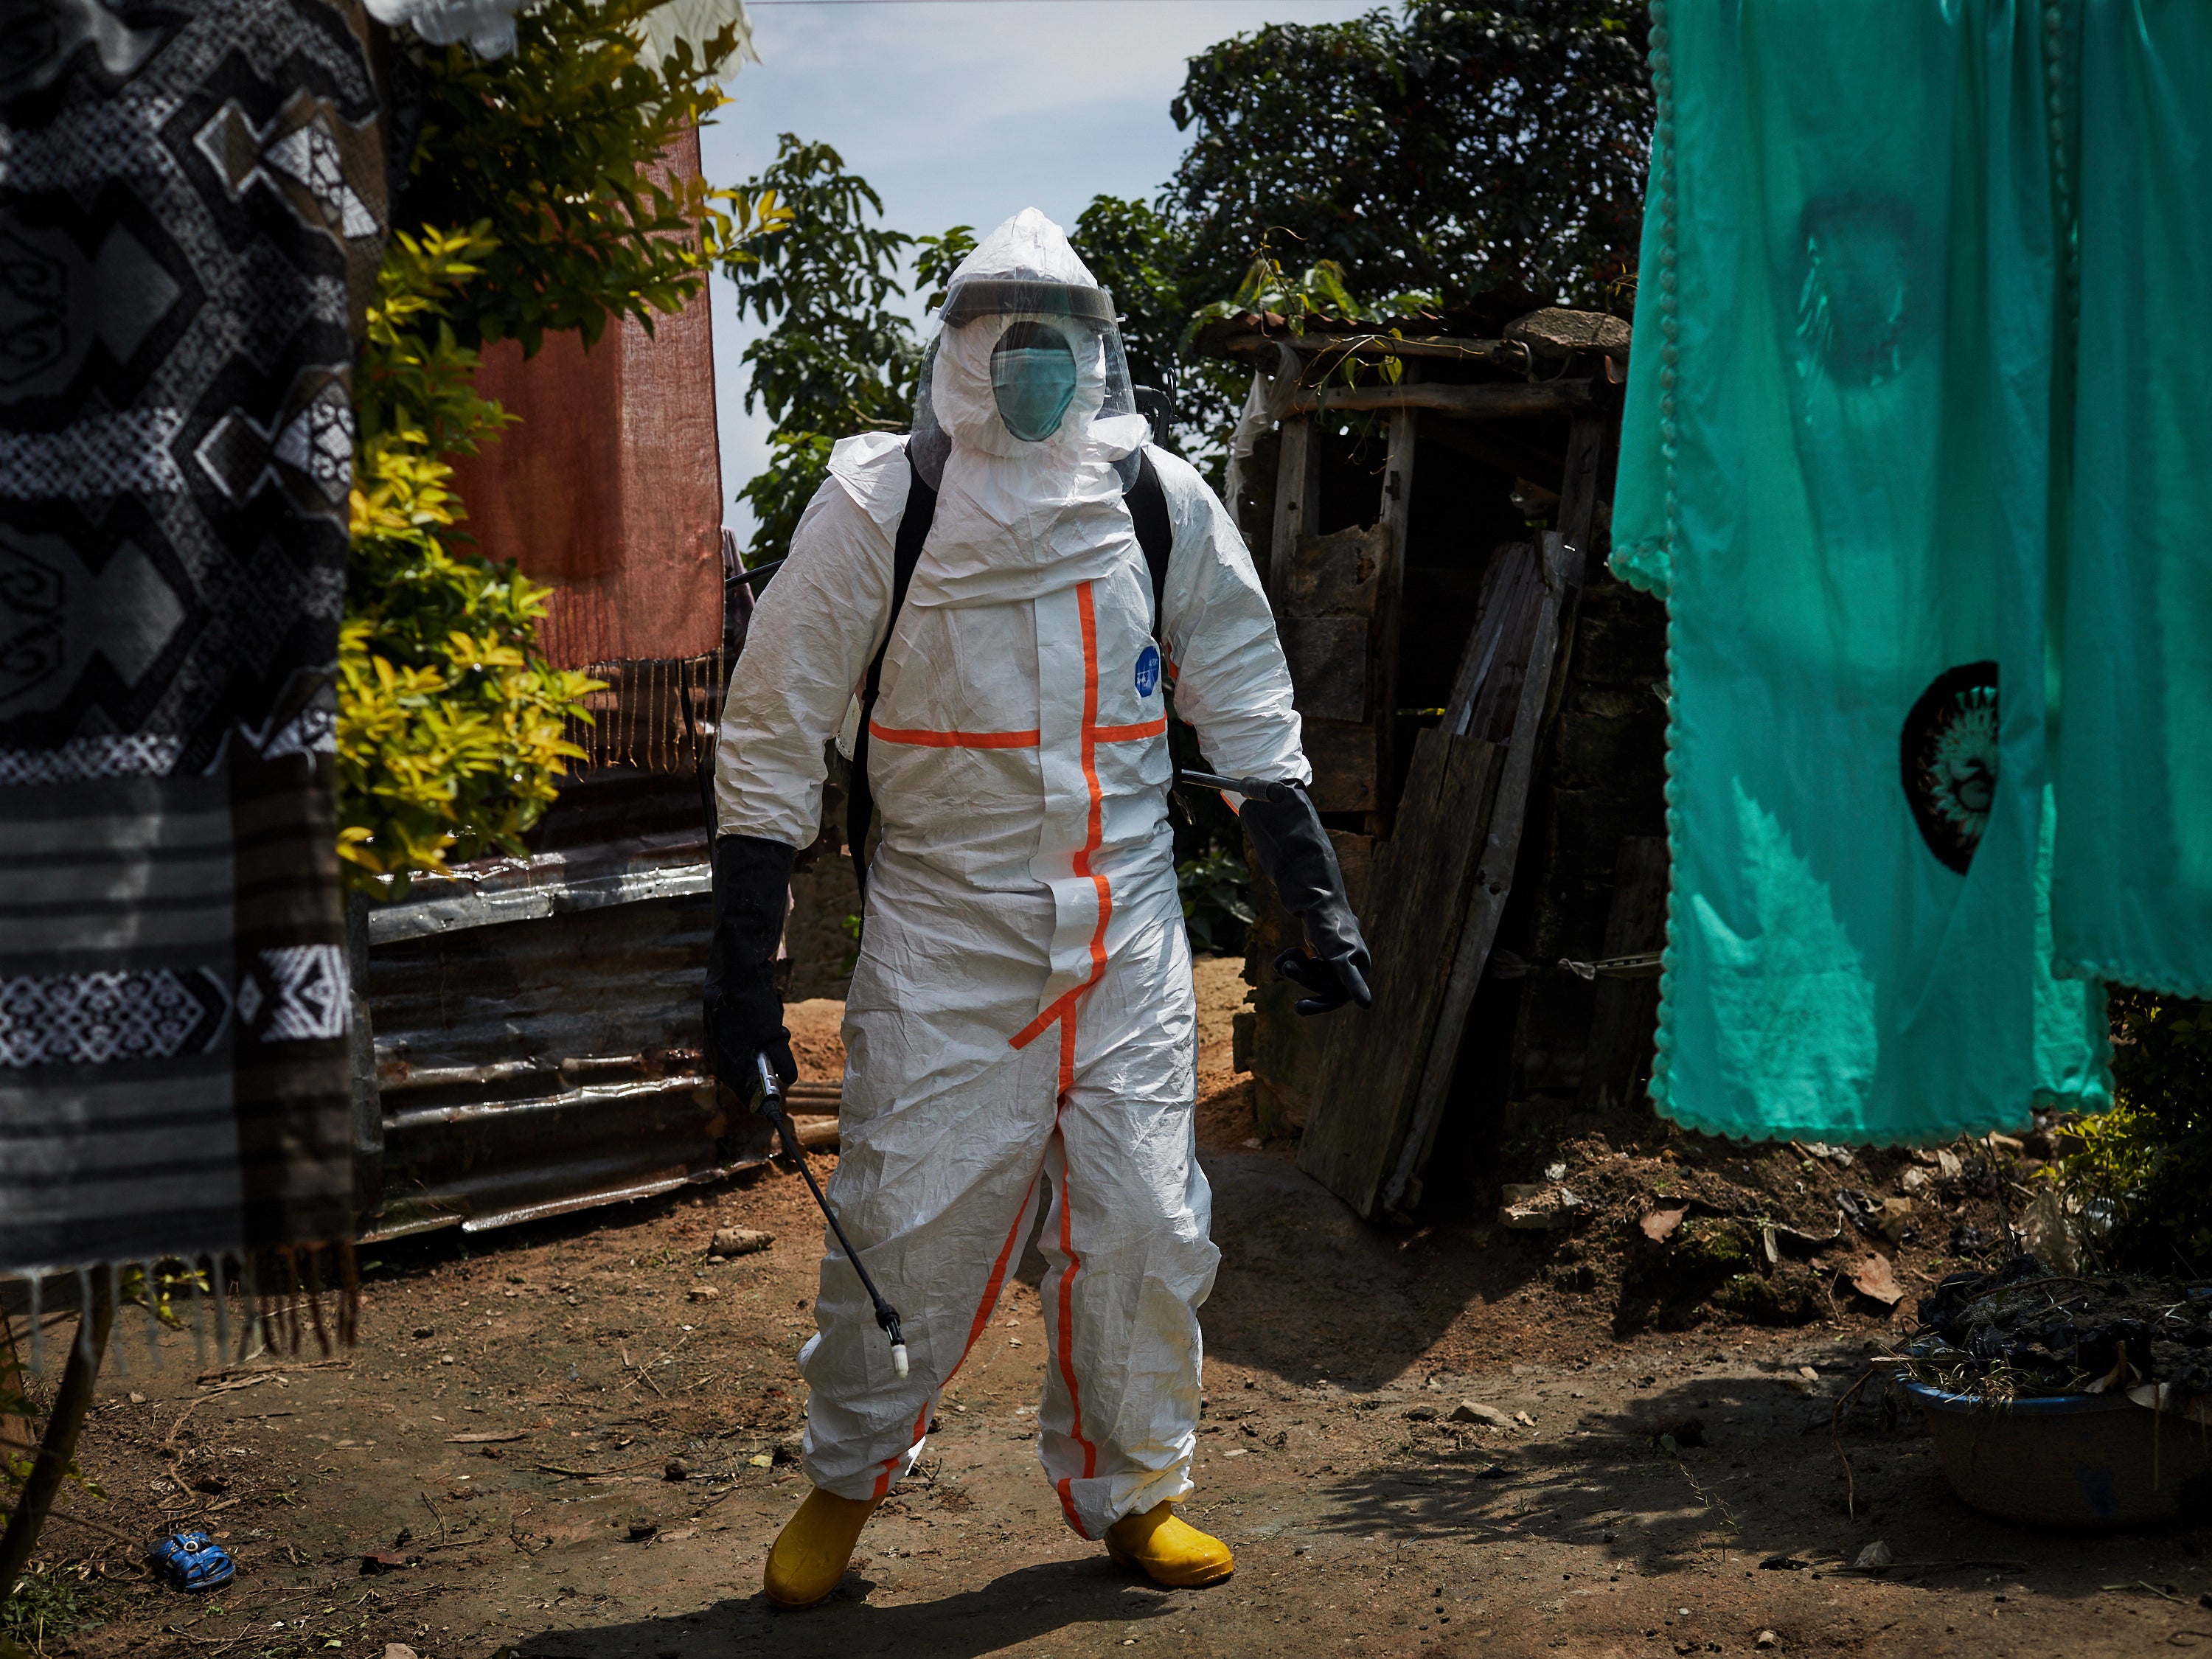 File photo: A health team disinfects and decontaminates homes in North Kivu province, Democratic Republic of the Congo, in August 2019